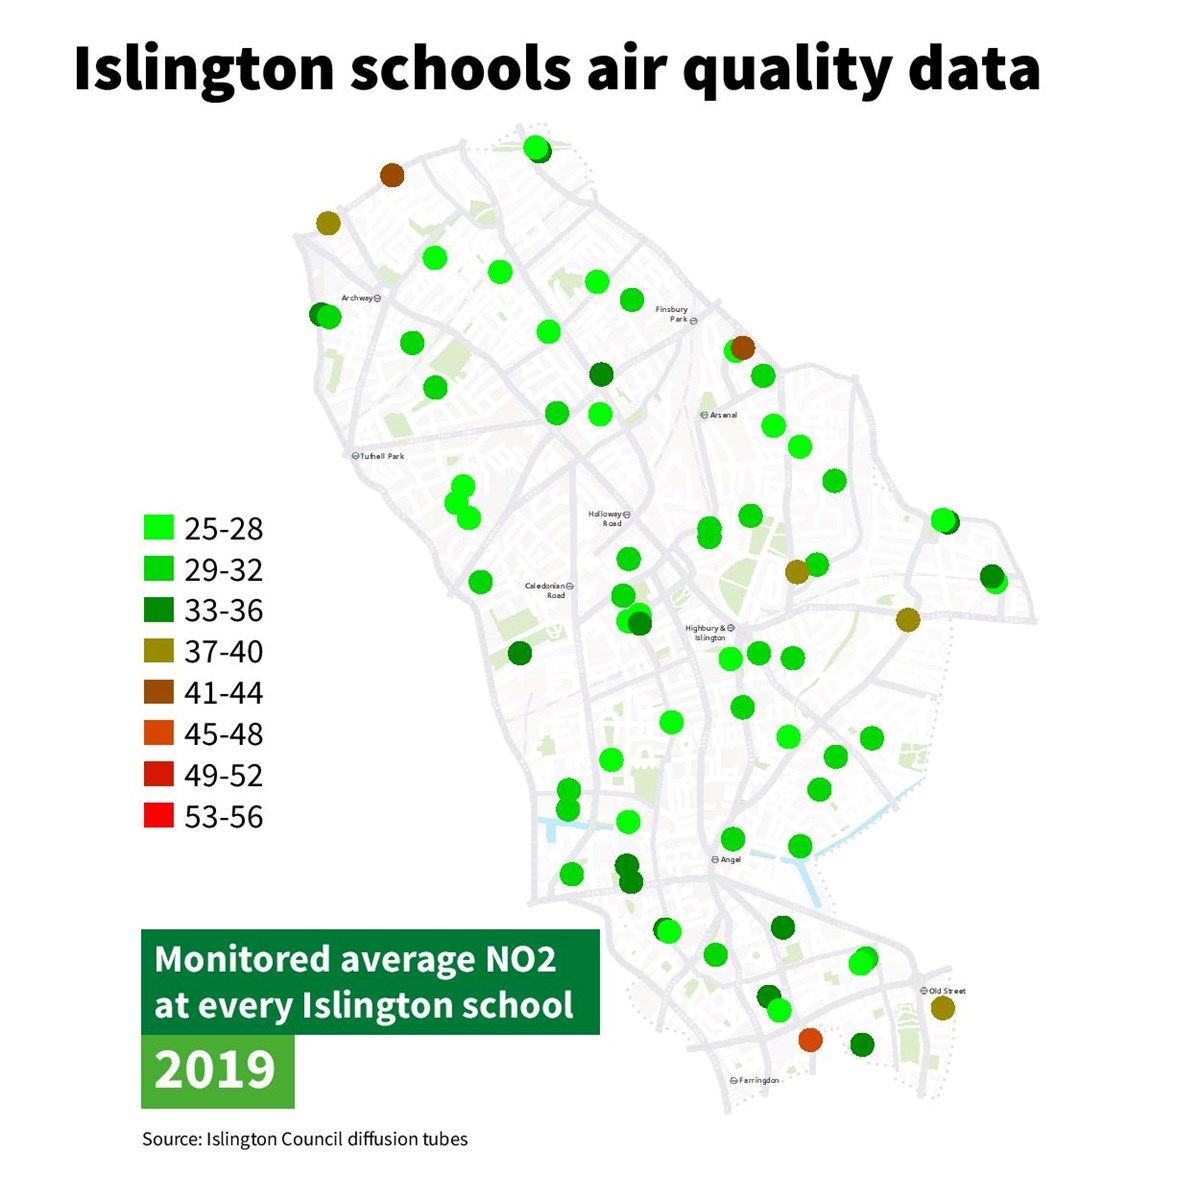 A map showing air quality levels at school monitoring sites in Islington in 2019